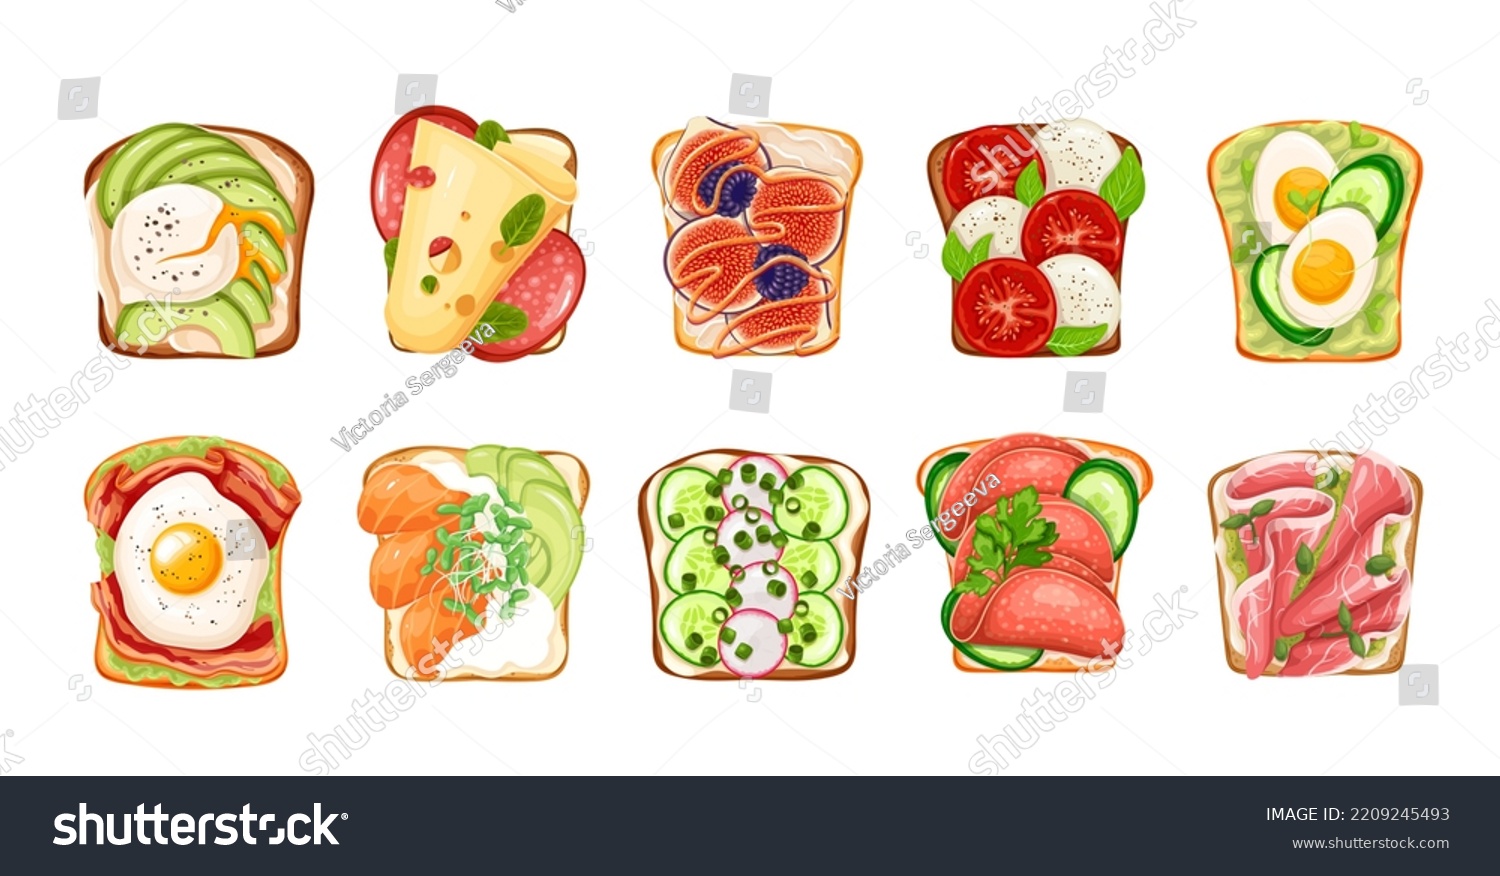 SVG of Healthy toasts set vector illustration. Cartoon isolated slices of toasted cereal bread with cheese and eggs, top view of sandwiches with ham and prosciutto, salmon and vegetables for breakfast svg